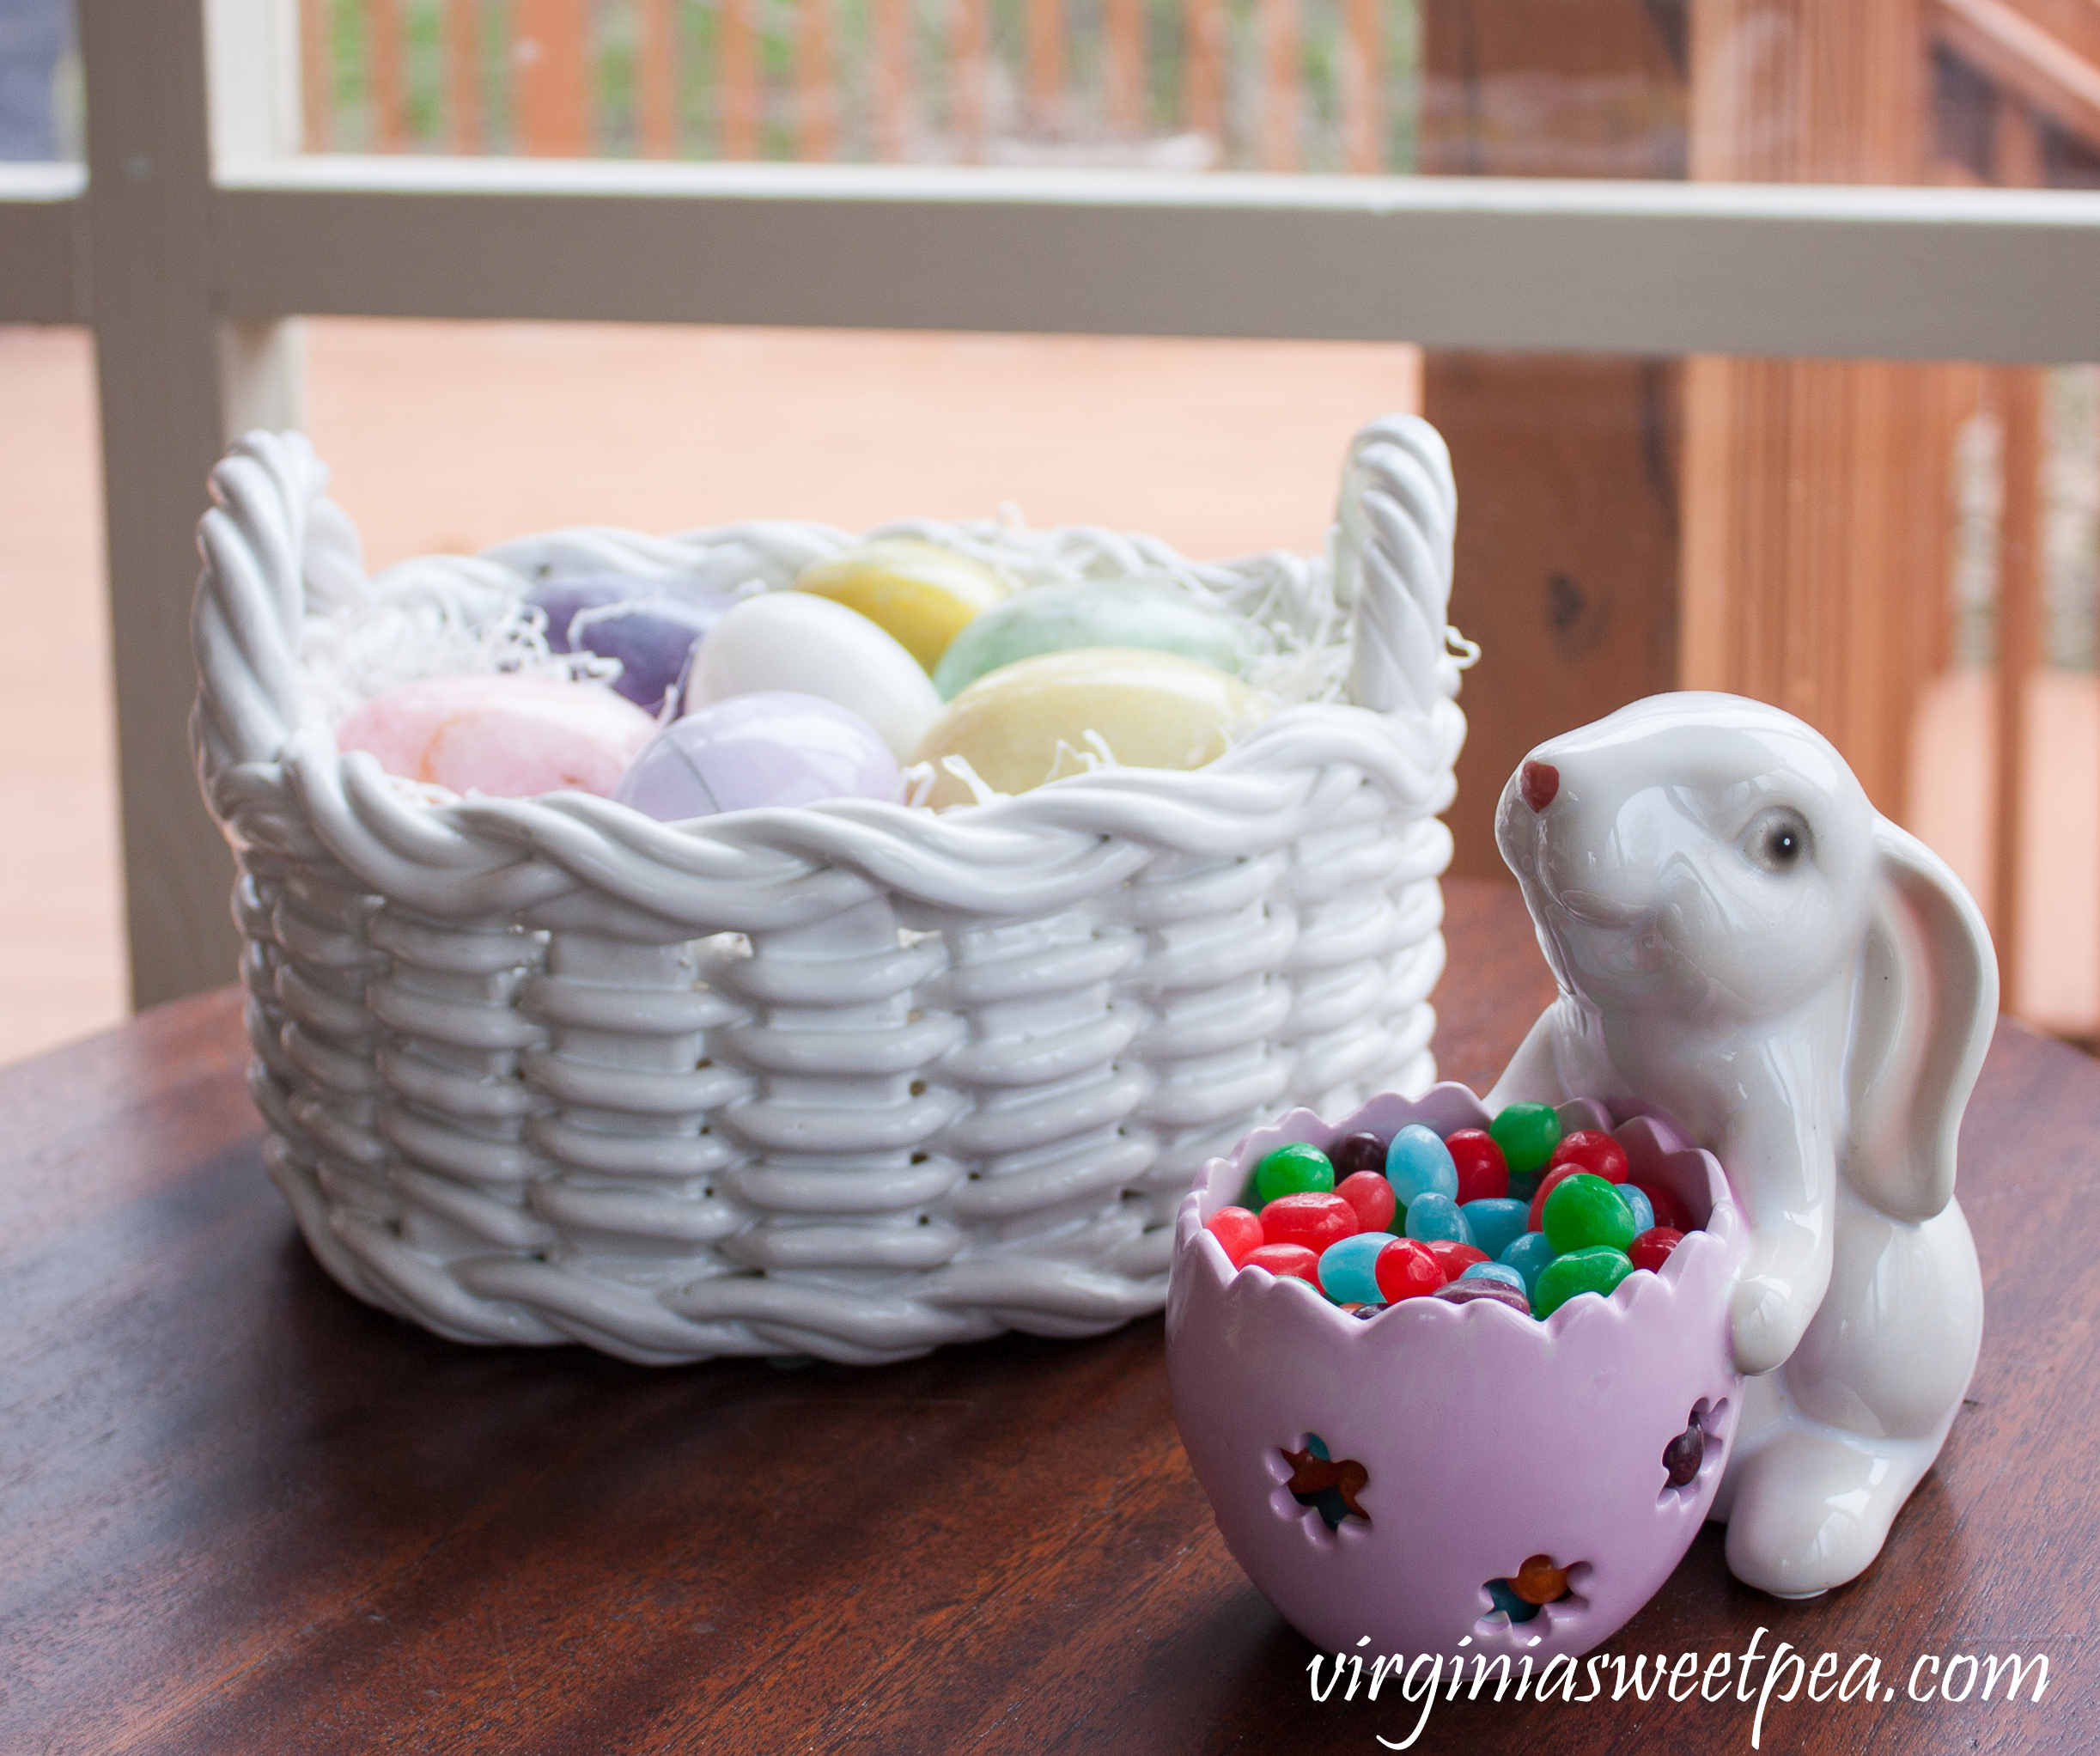 Easter Vignette with a bunny serving jellybeans and a ceramic basket filled with marble eggs